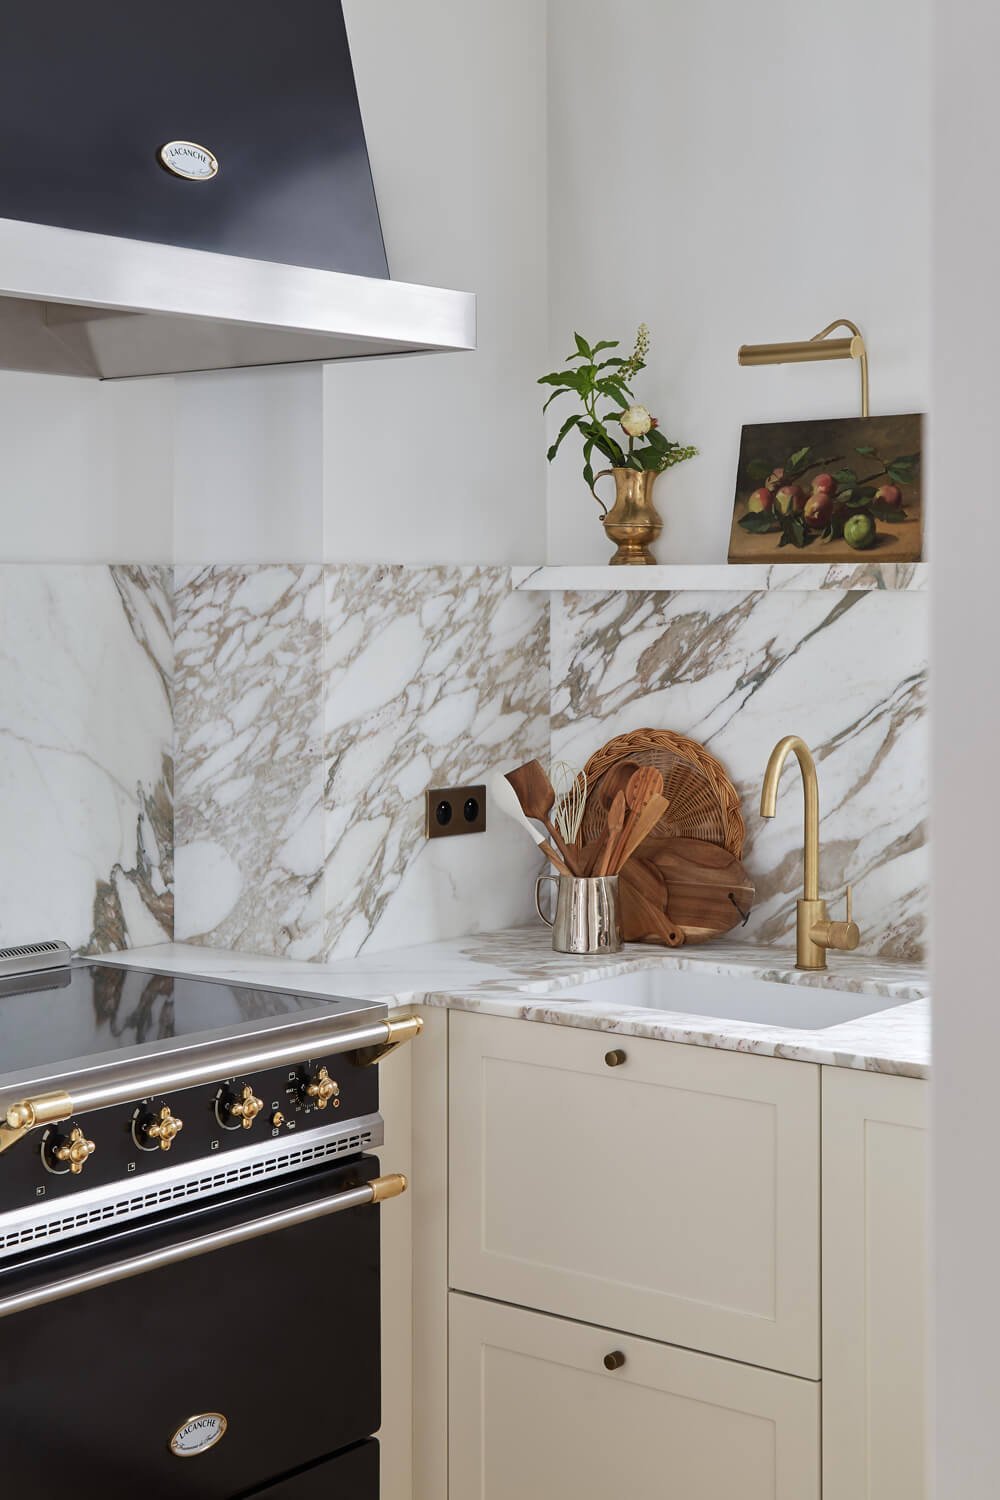  A very chic corner of the functional kitchen. The marble backsplash is a perfect match to the golden fixtures in the kitchen. 